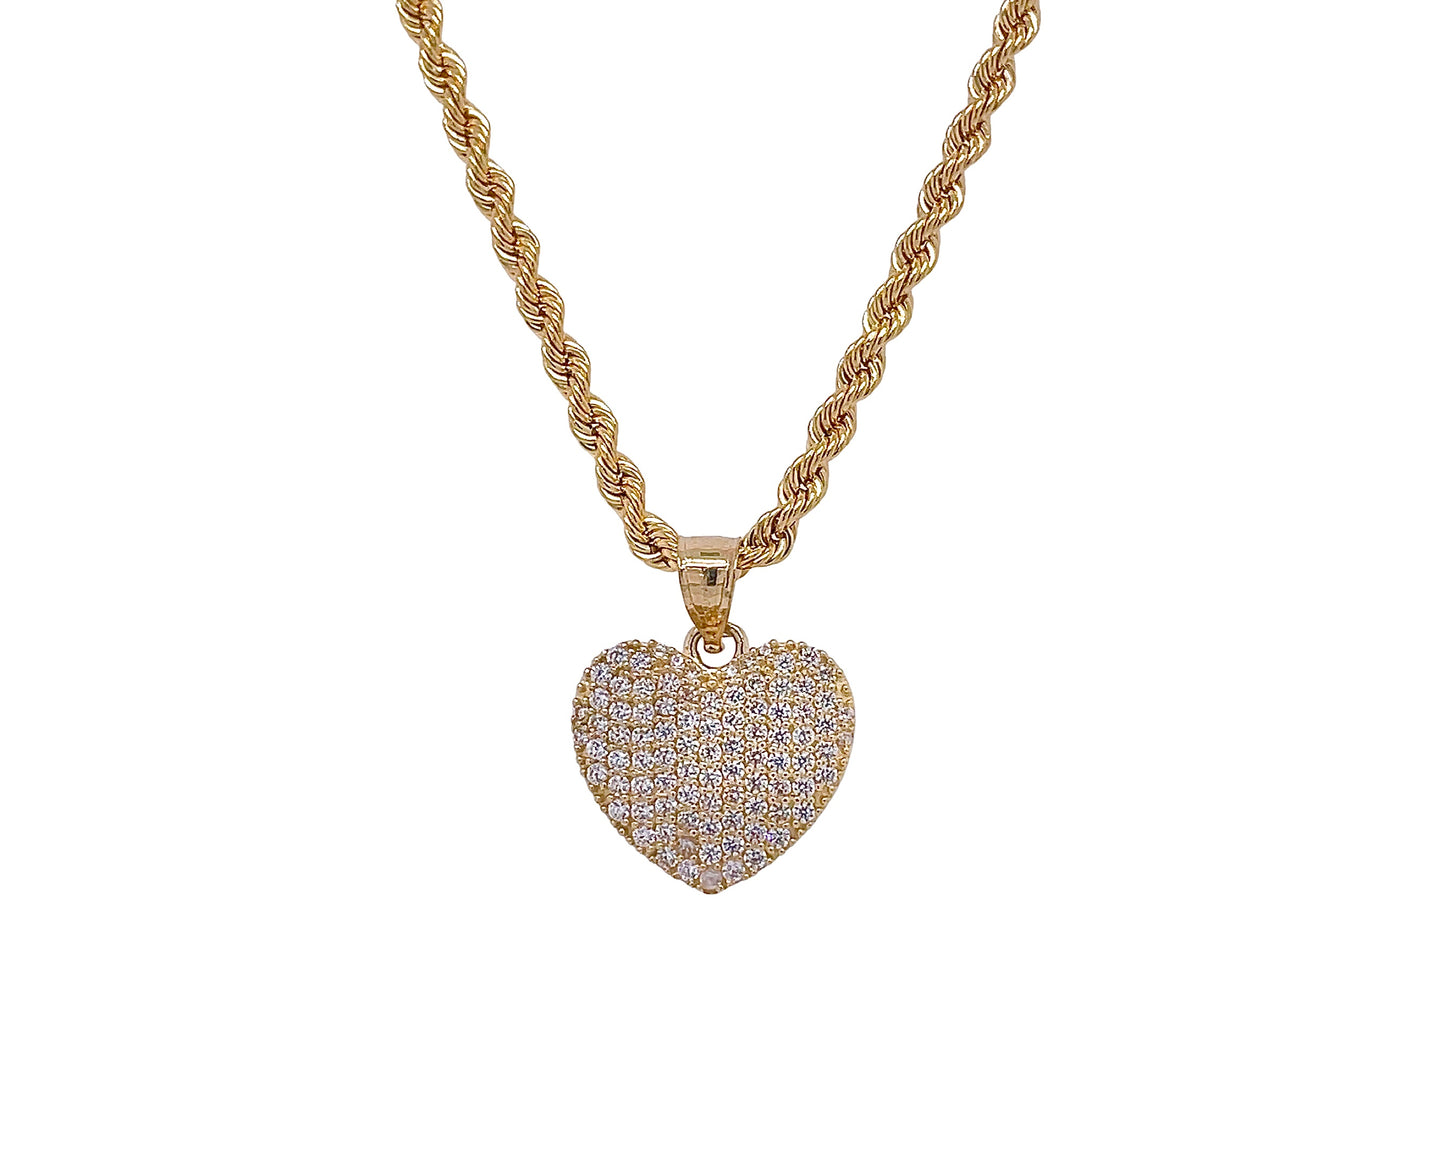 10k yellow gold cz heart charm with rope chain 